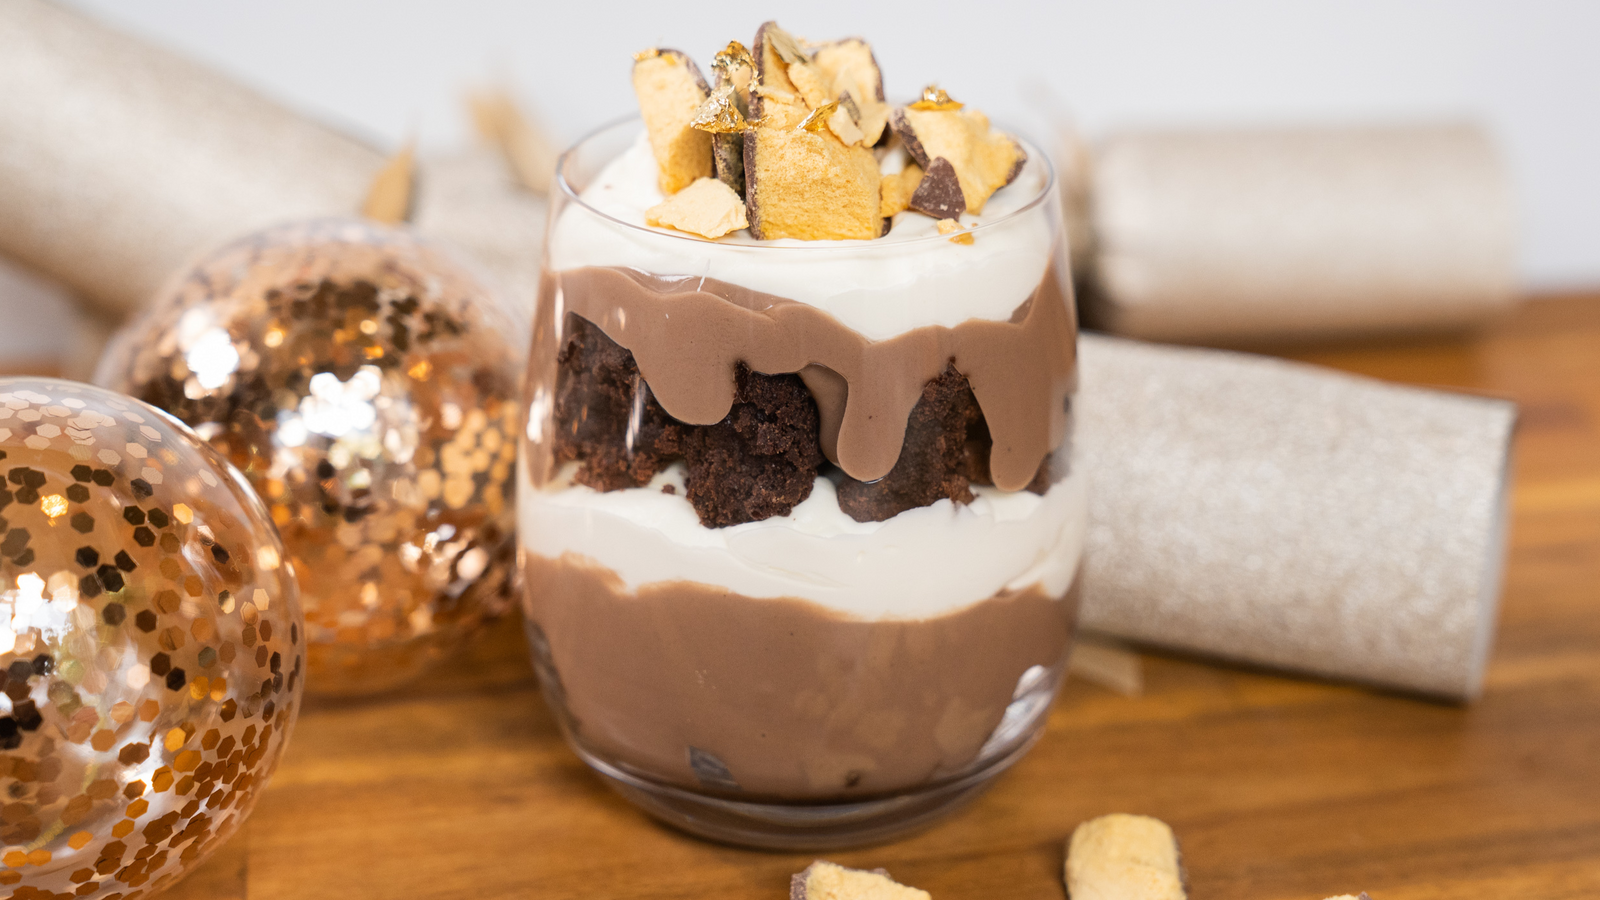 Two Minute Violet Crumble Choc Trifle